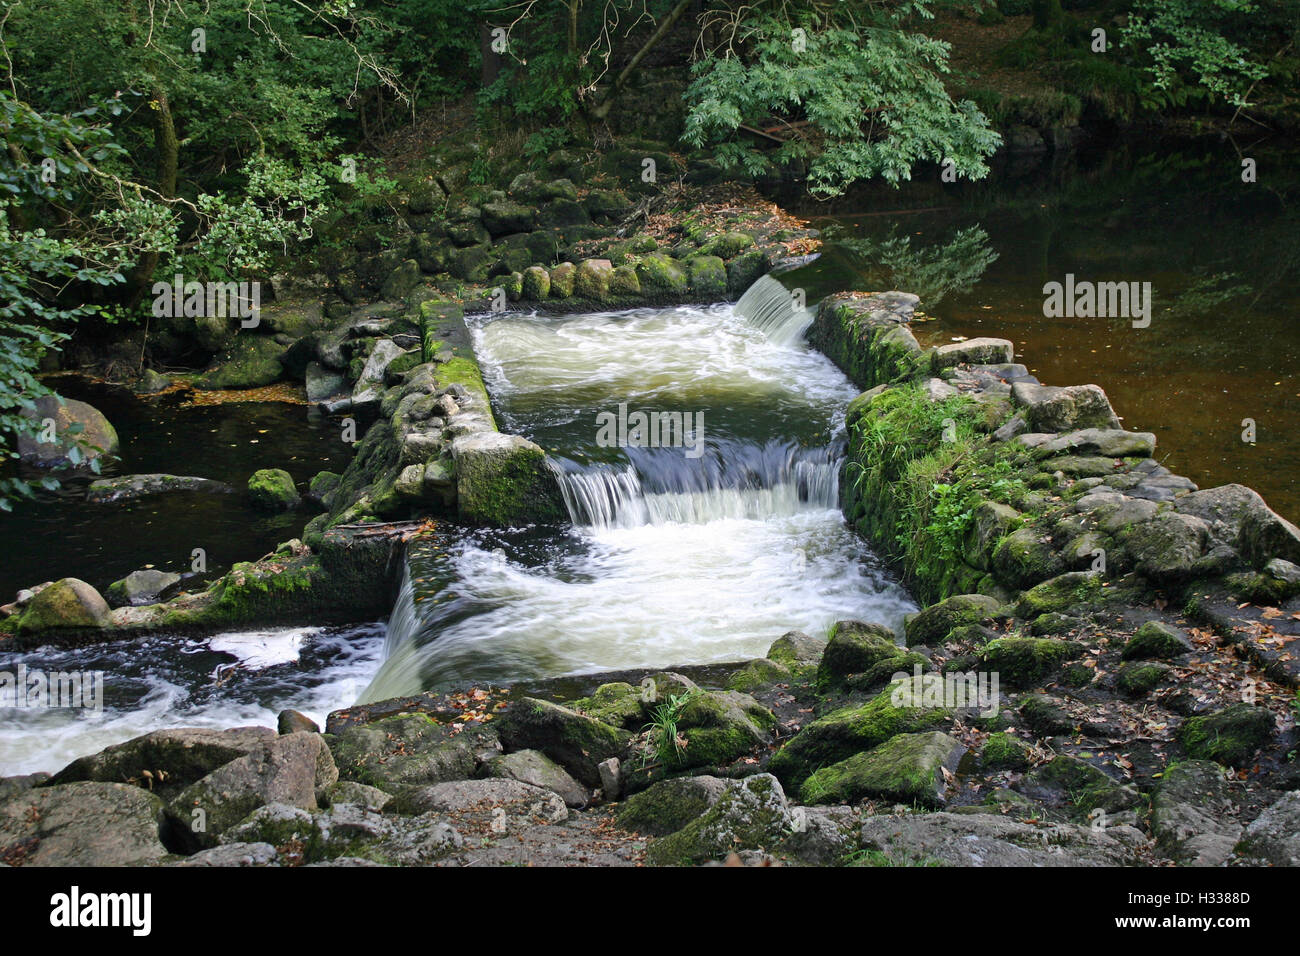 Double weir on a river Stock Photo